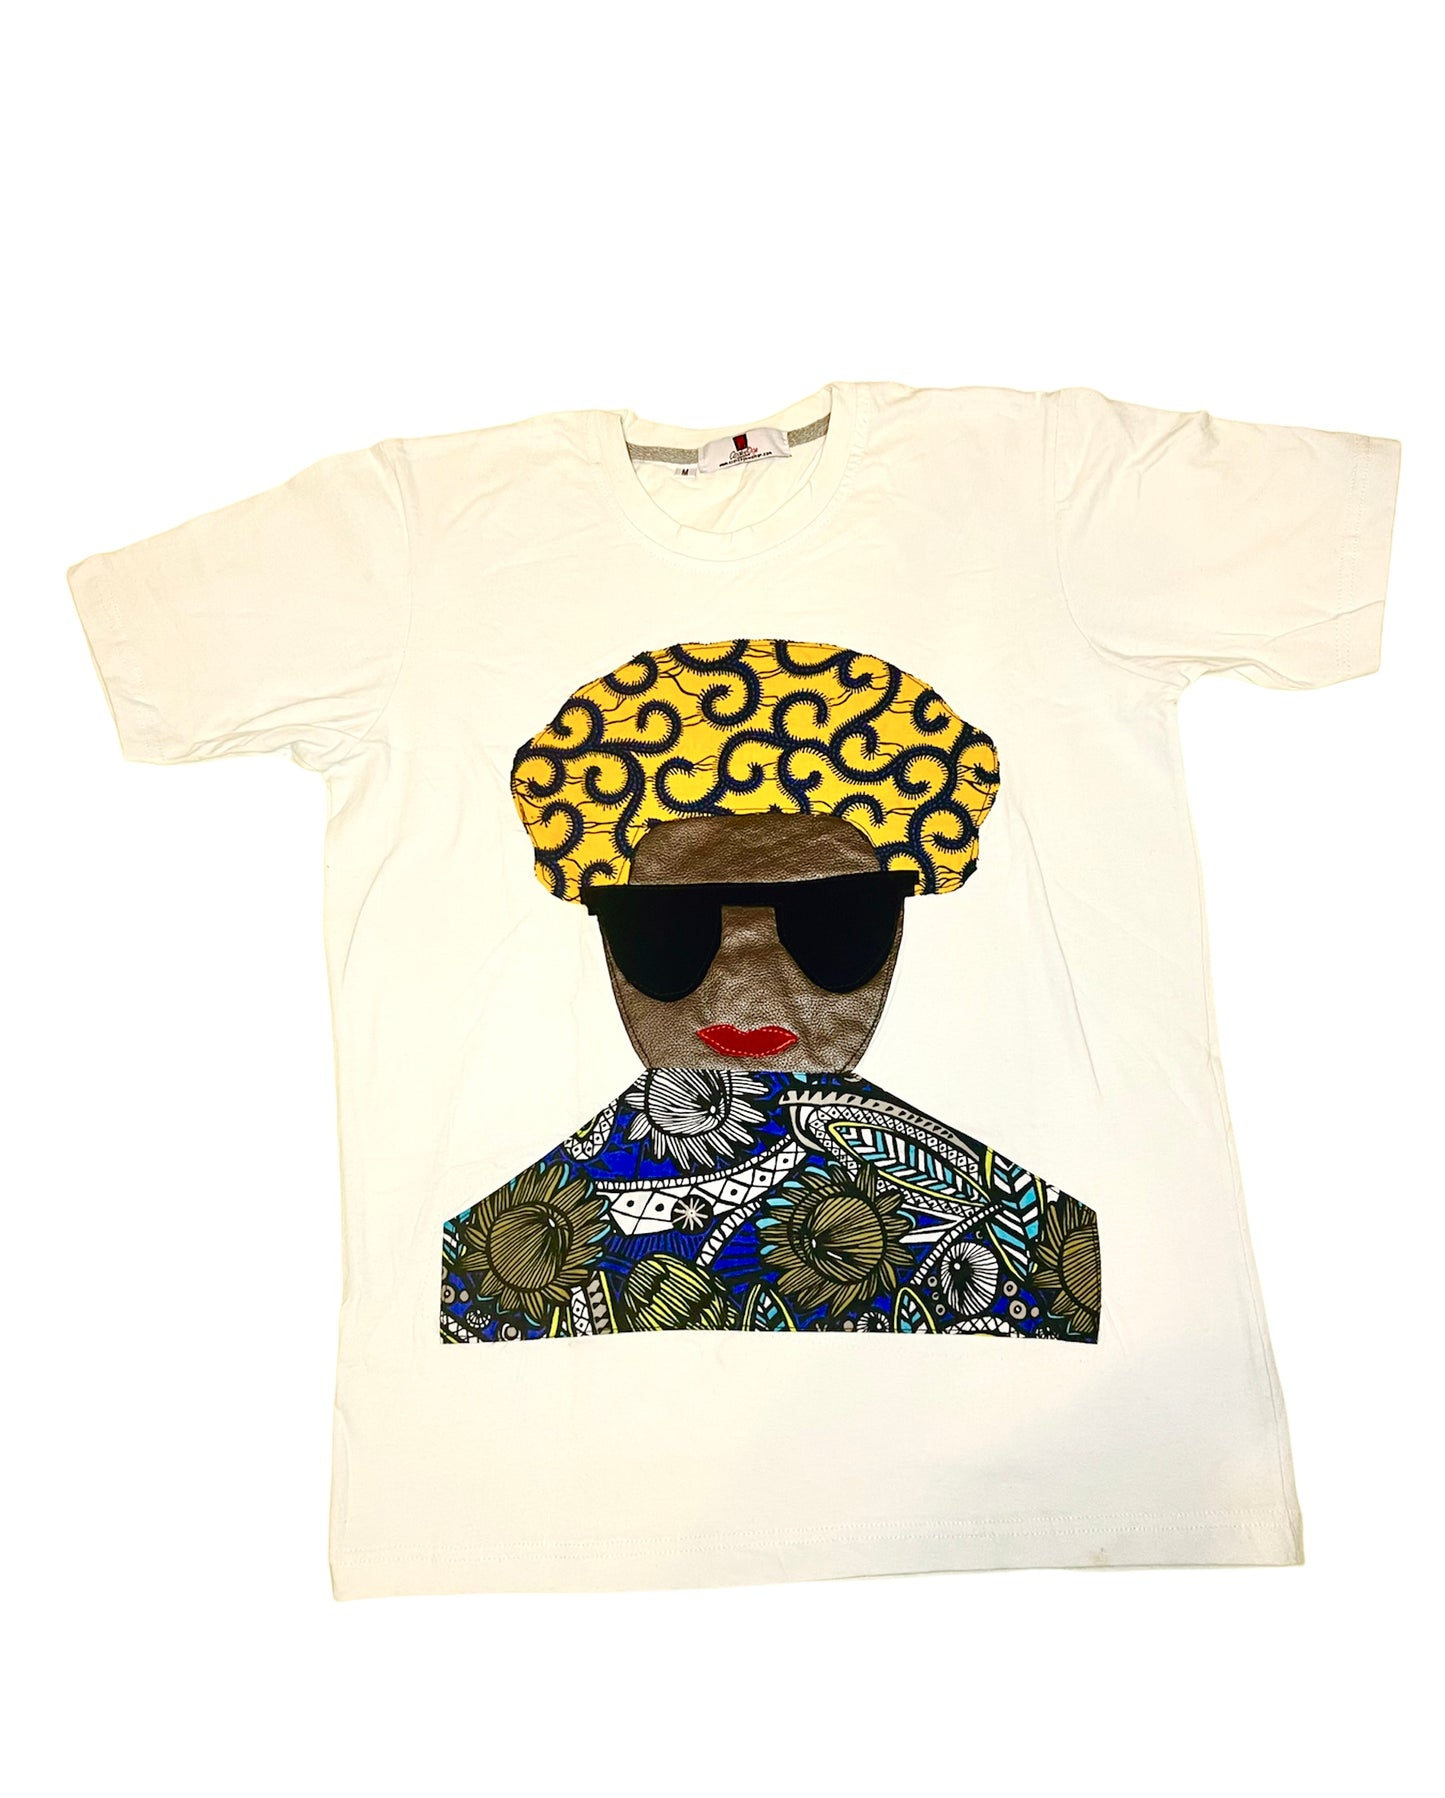 Boss Chic Tee with Ankara Bonnet and Body Wrap, Sunshades, and embossed Leather-Face.